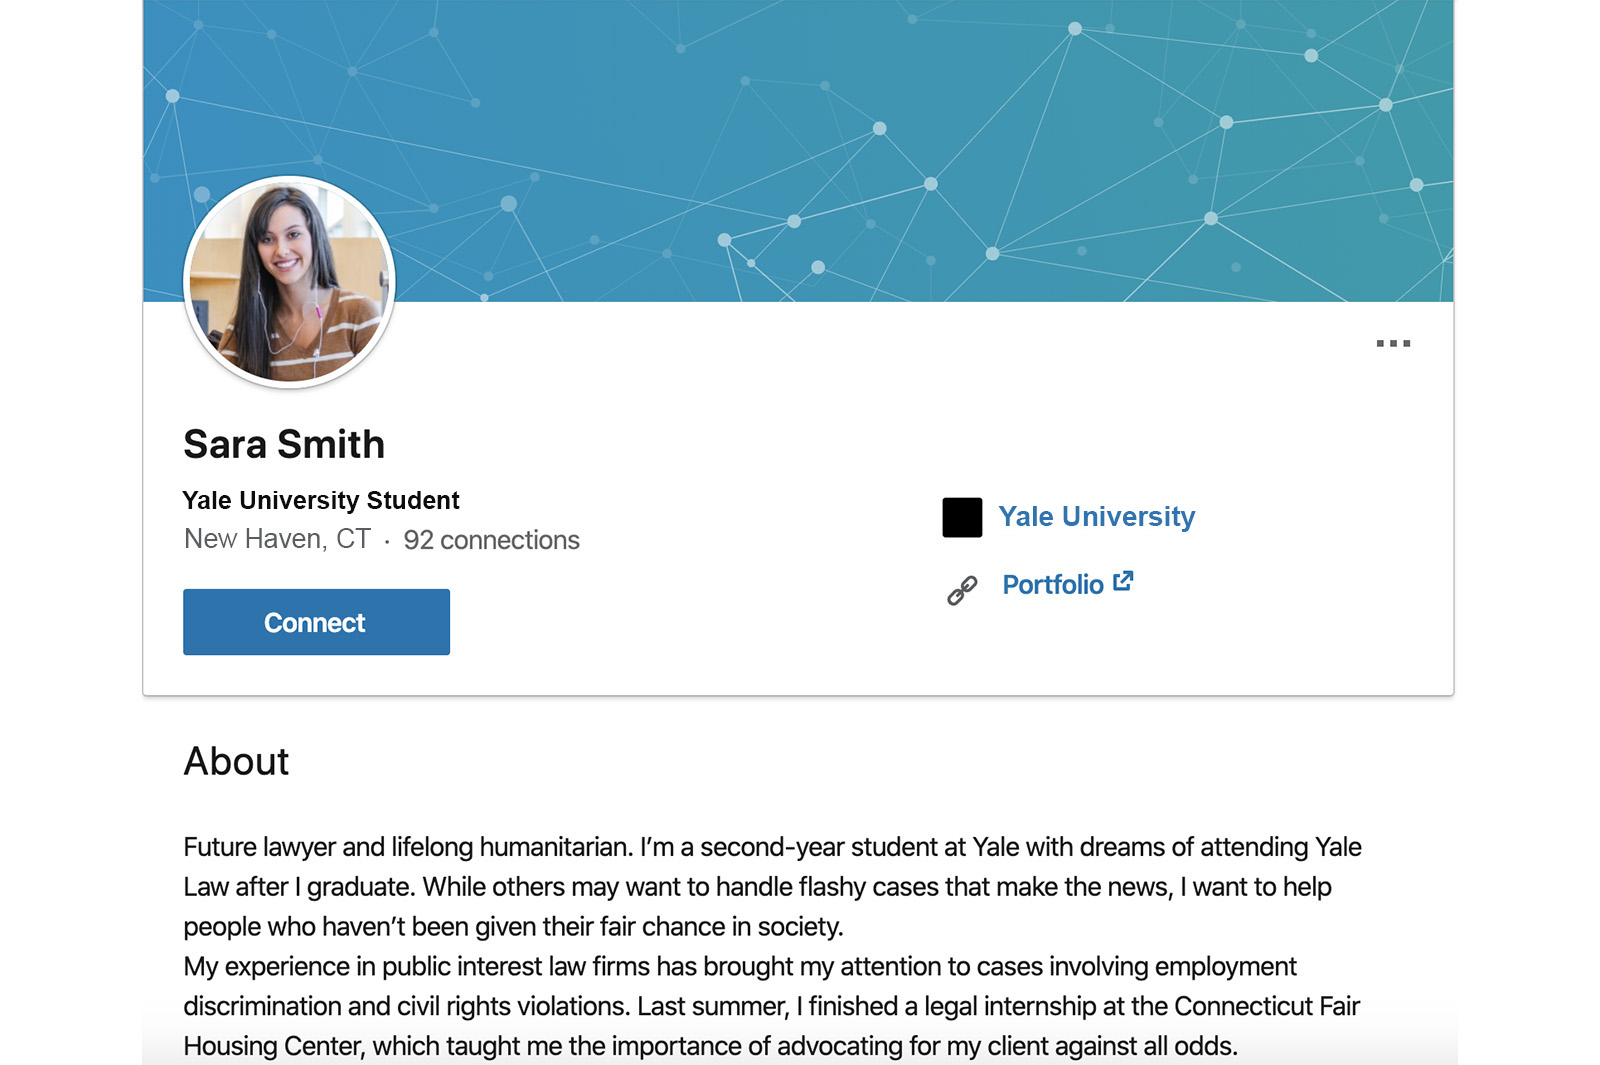 introduction section in linkedin